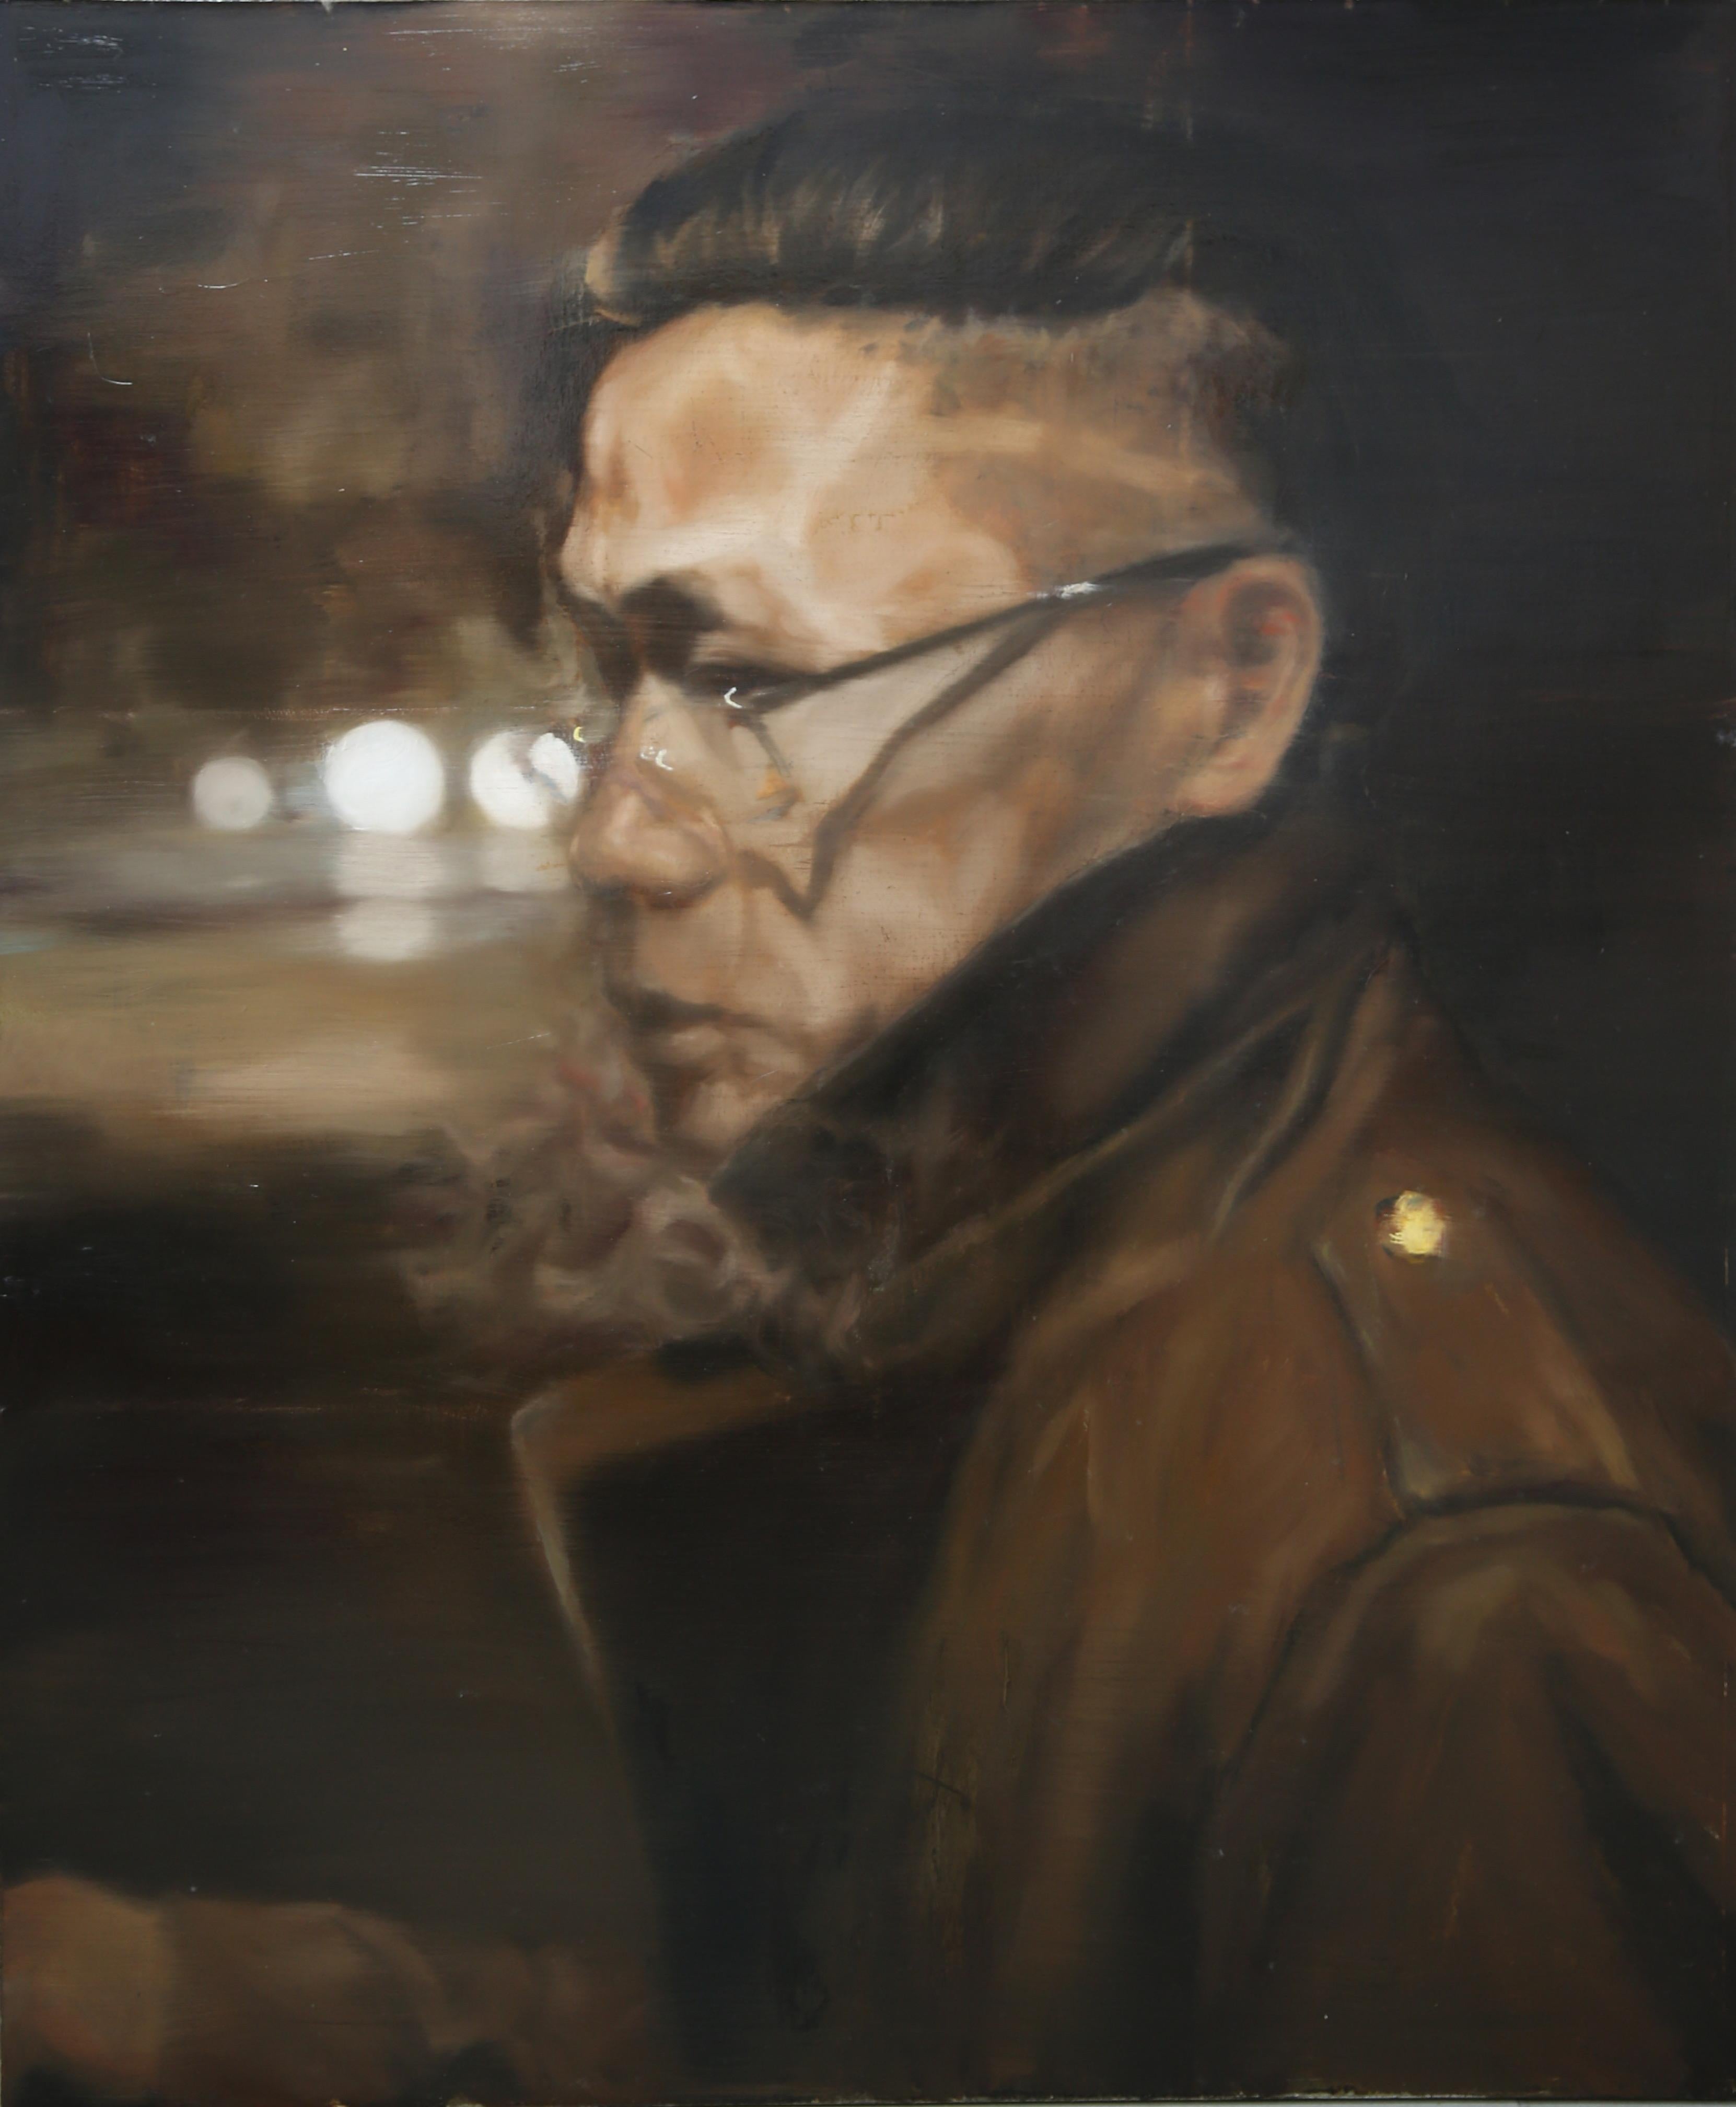 Oil on canvas

Wang Dianyu is a Chinese male artist born in 1983 who lives and works in Beijing, China. He is a bachelor of Oil Painting Department at Minzu University of China. Between 2012 and 2014, he completed advanced training courses at